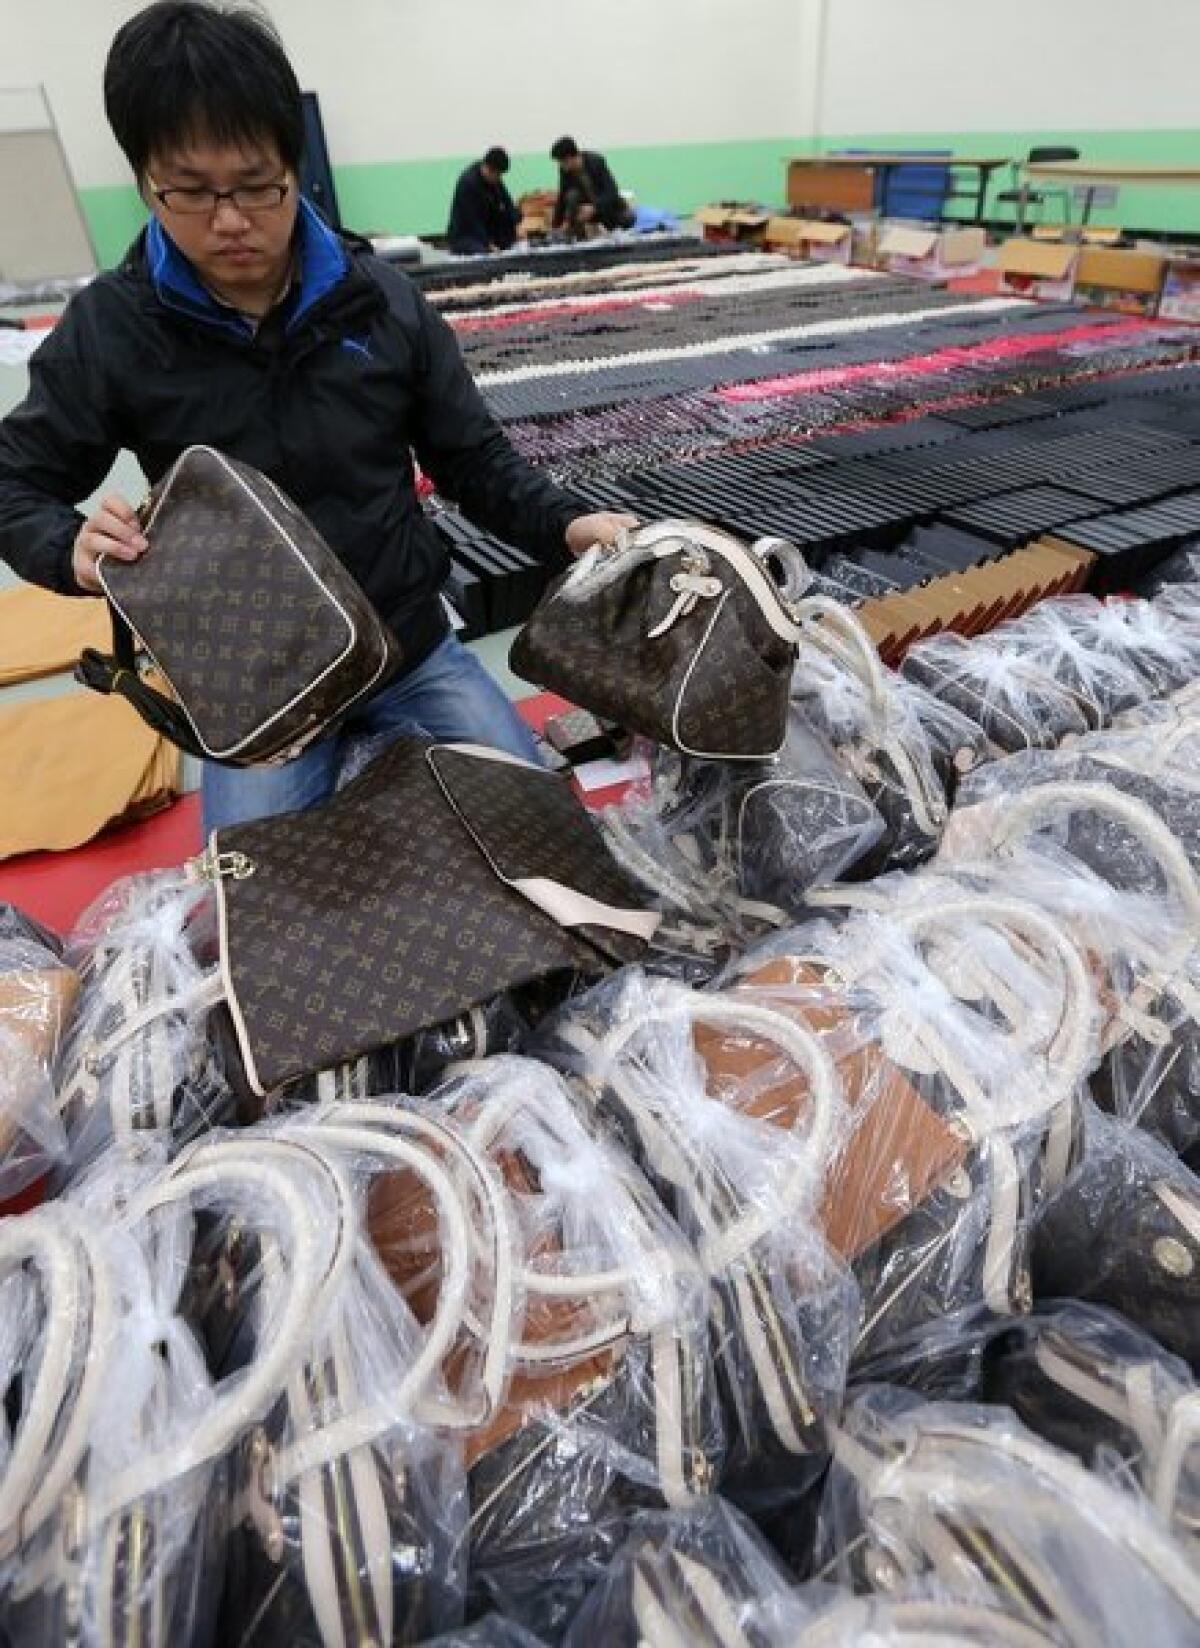 The sale of counterfeit goods is an international problem.